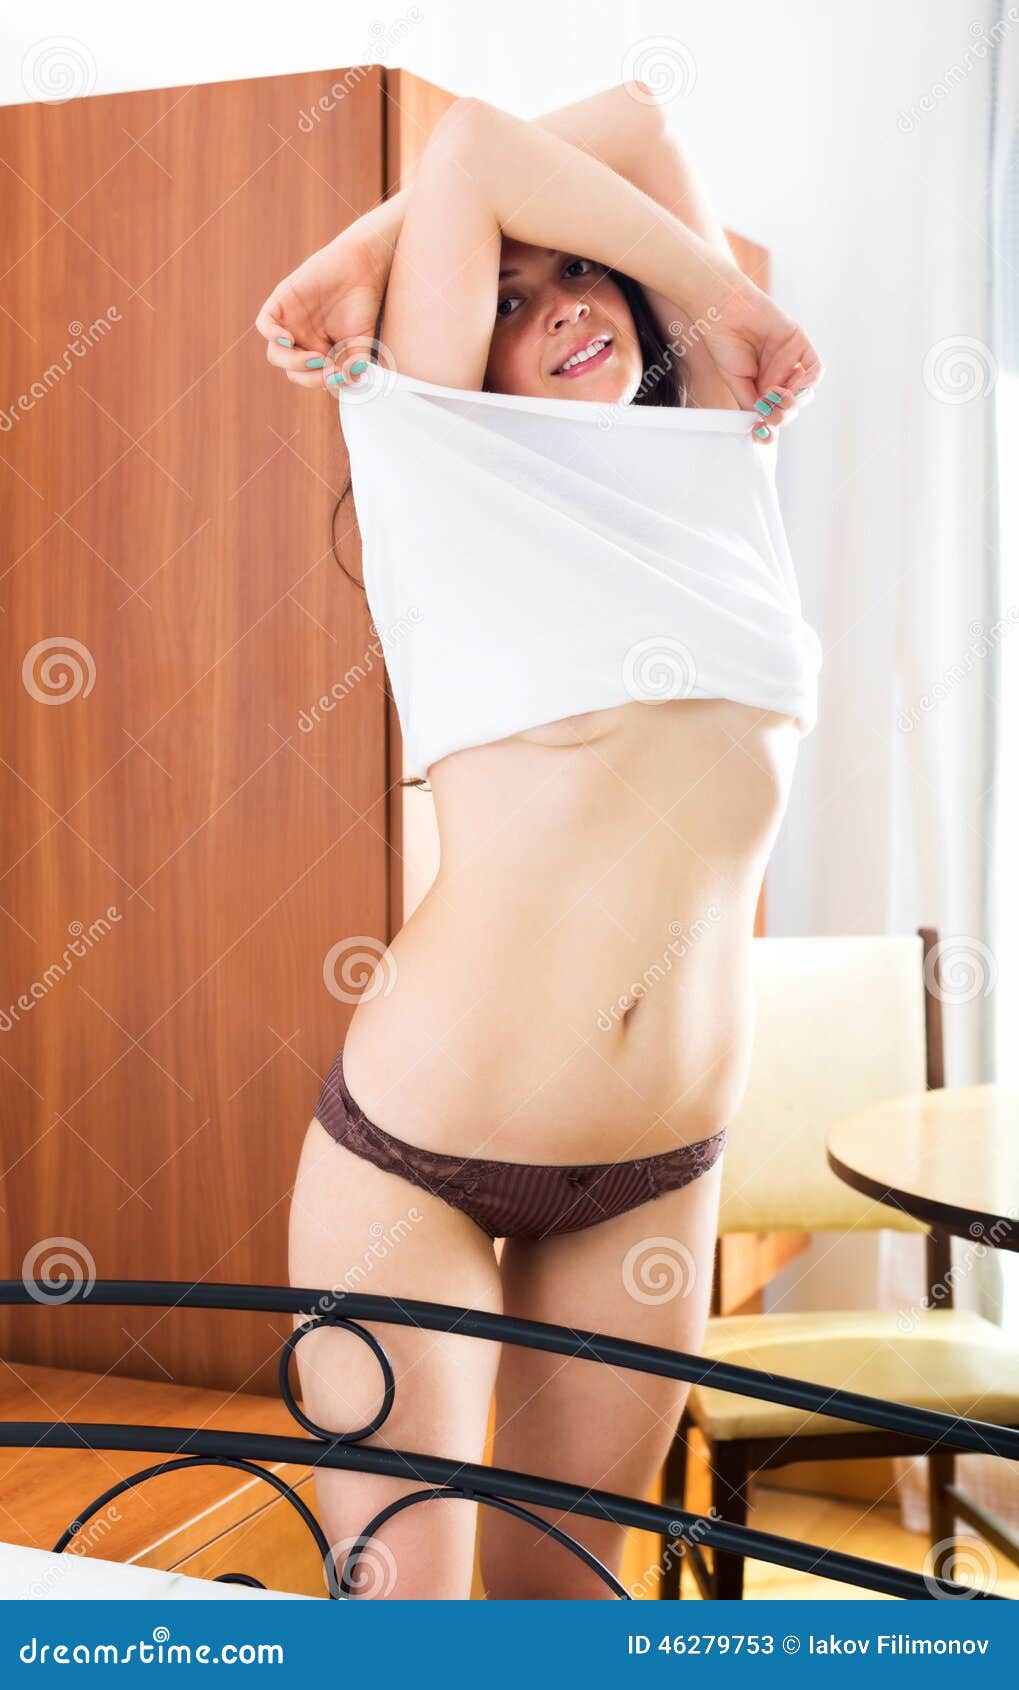 Smiling girl takes off his underwear in bedroom.